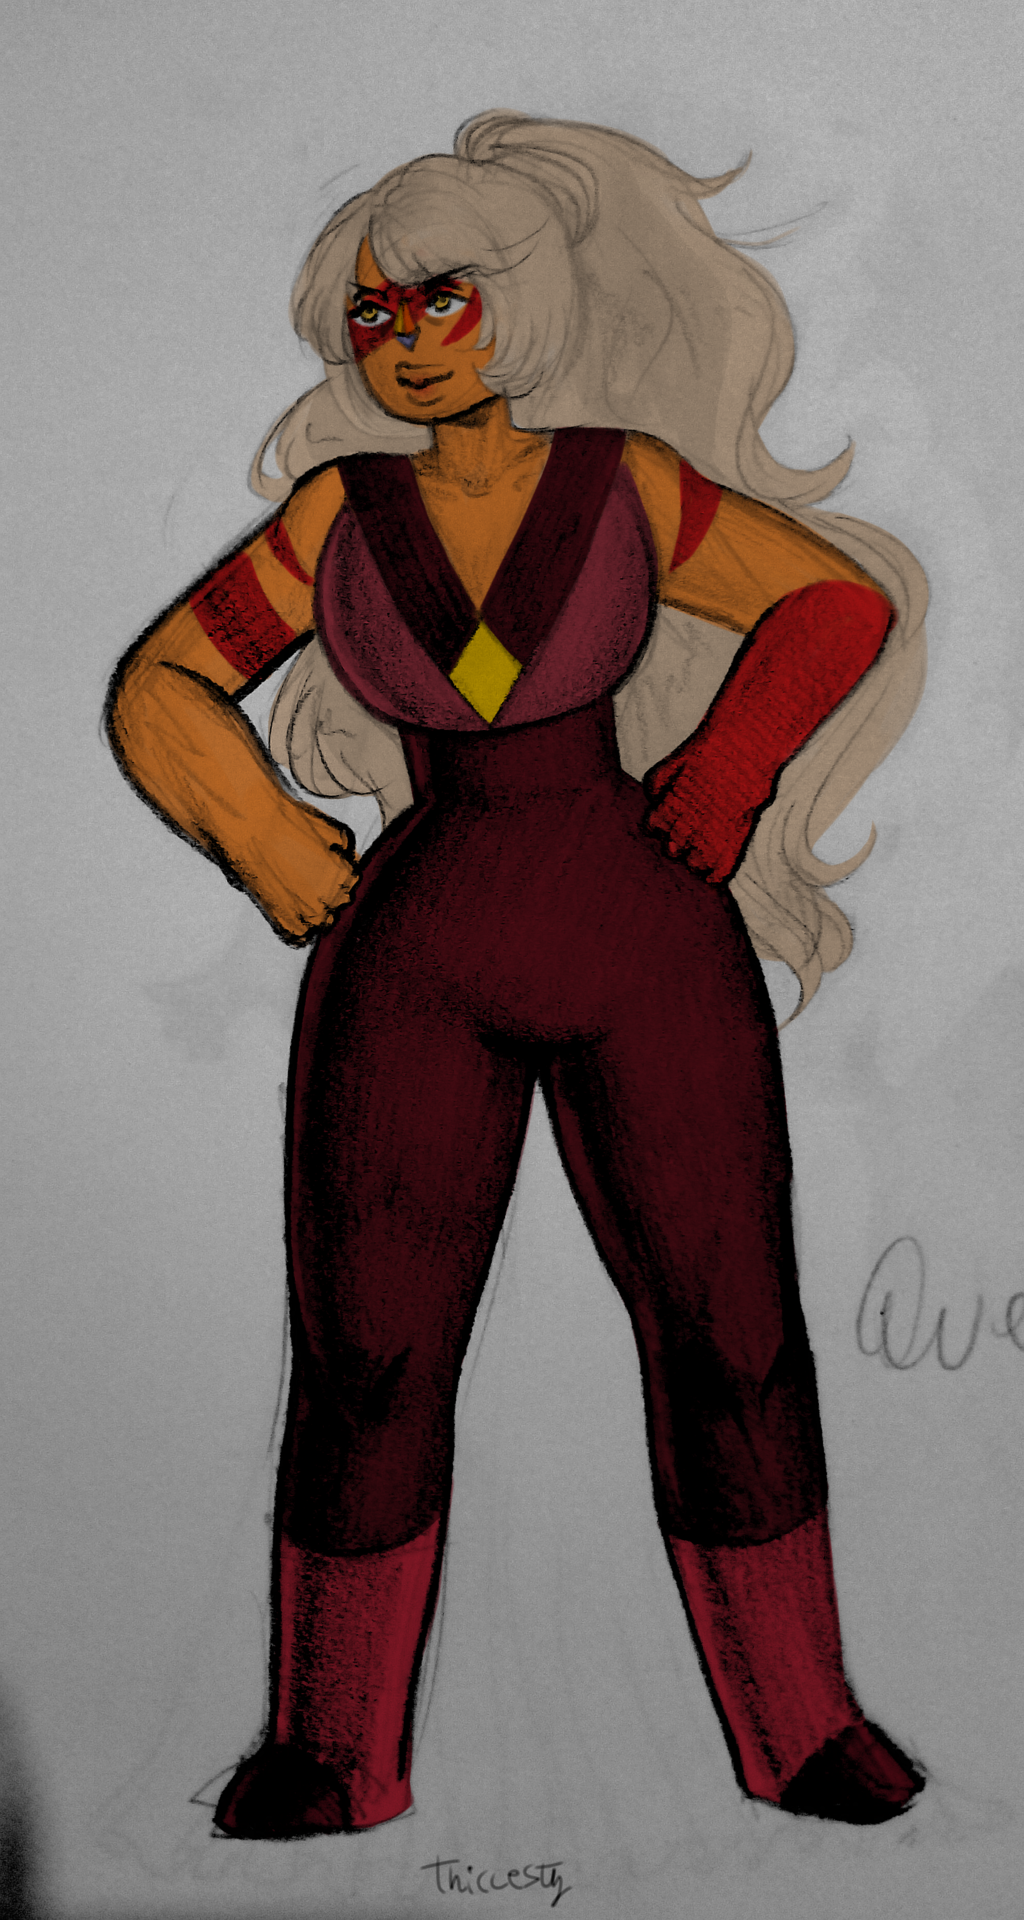 I found this in my camera roll and I coloured it. It’s kinda dark but eh, it fits with Jasper. I really miss her.